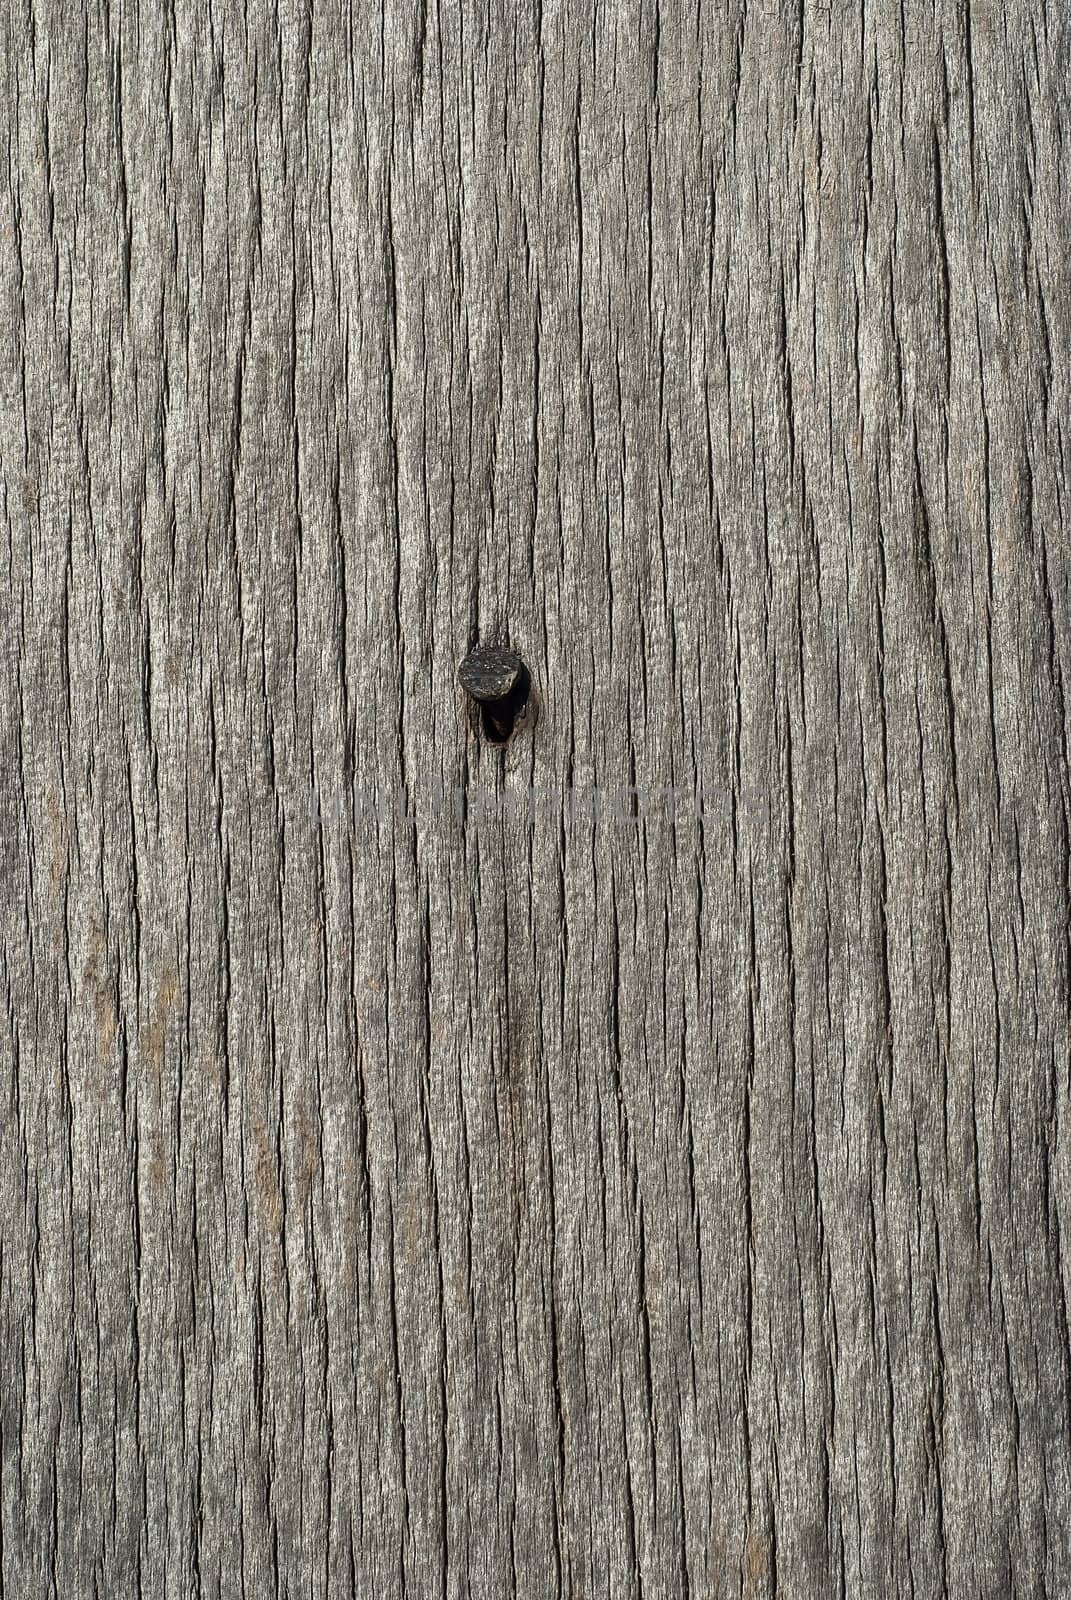 Old weathered grey wooden board with nail head